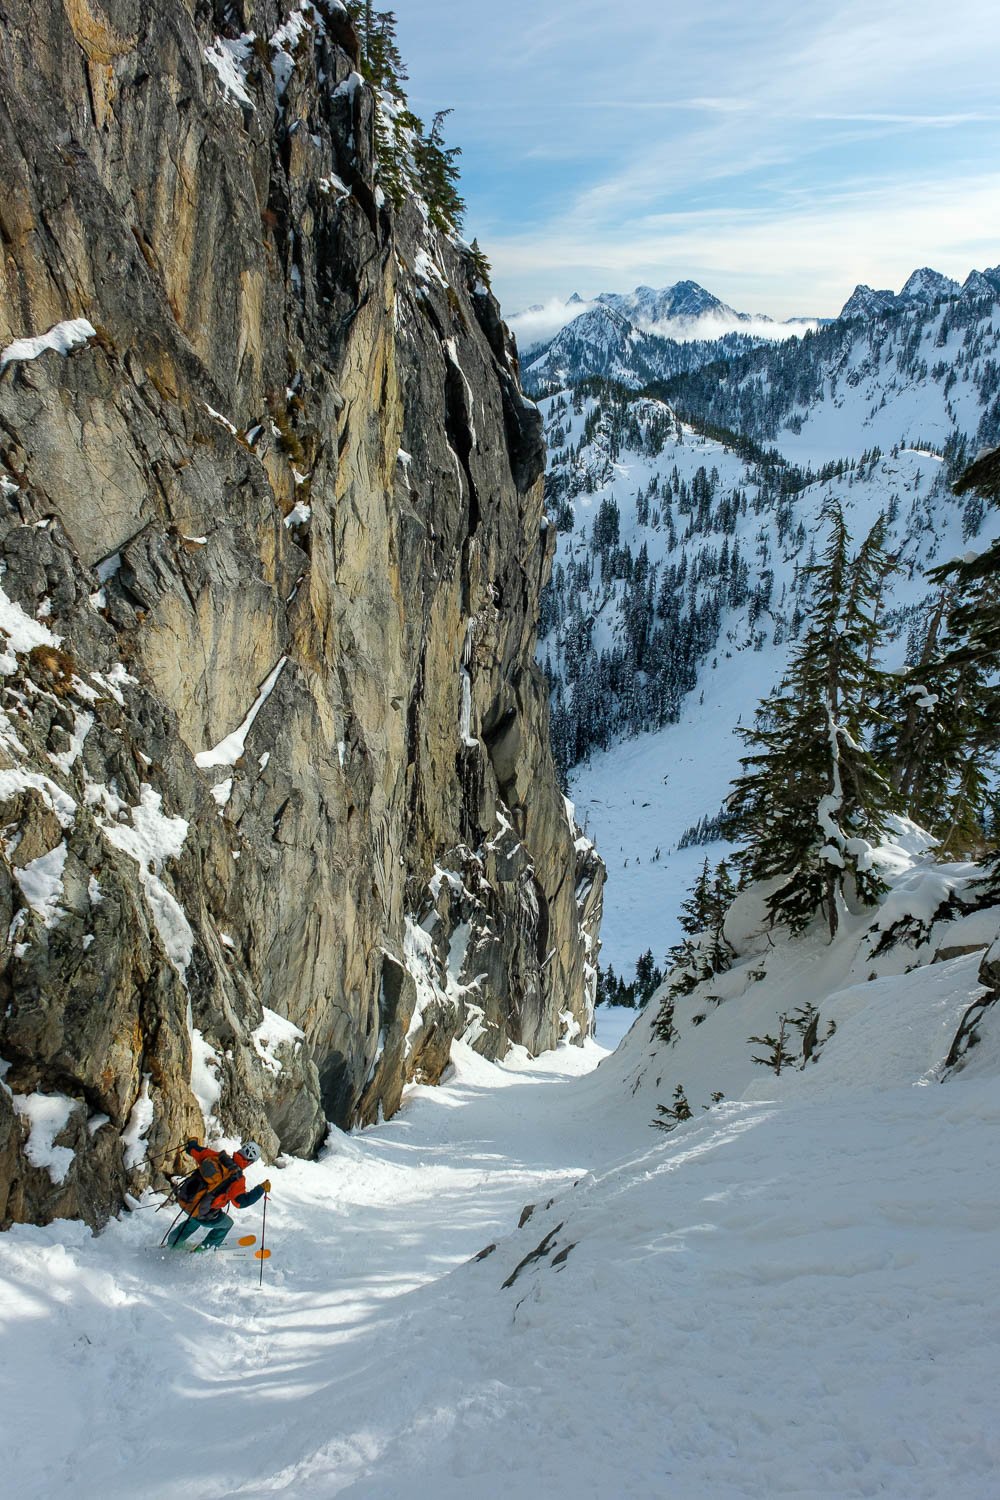  Matt skiing the Preacher Mountain Couloir. Mount Snoqualmie with clouds in the distance. 